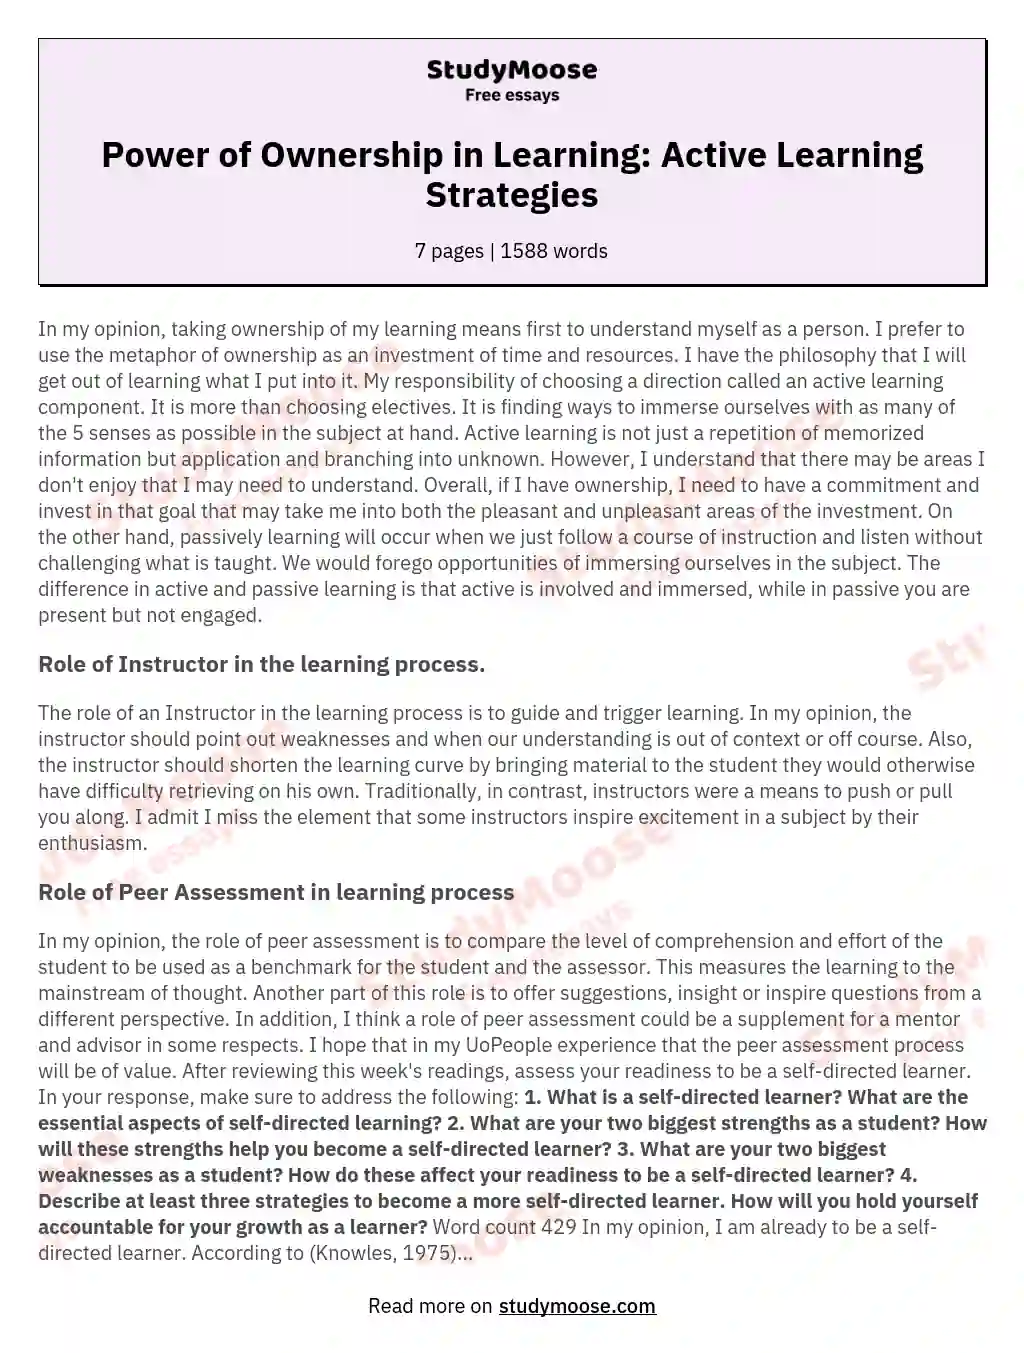 Power of Ownership in Learning: Active Learning Strategies essay